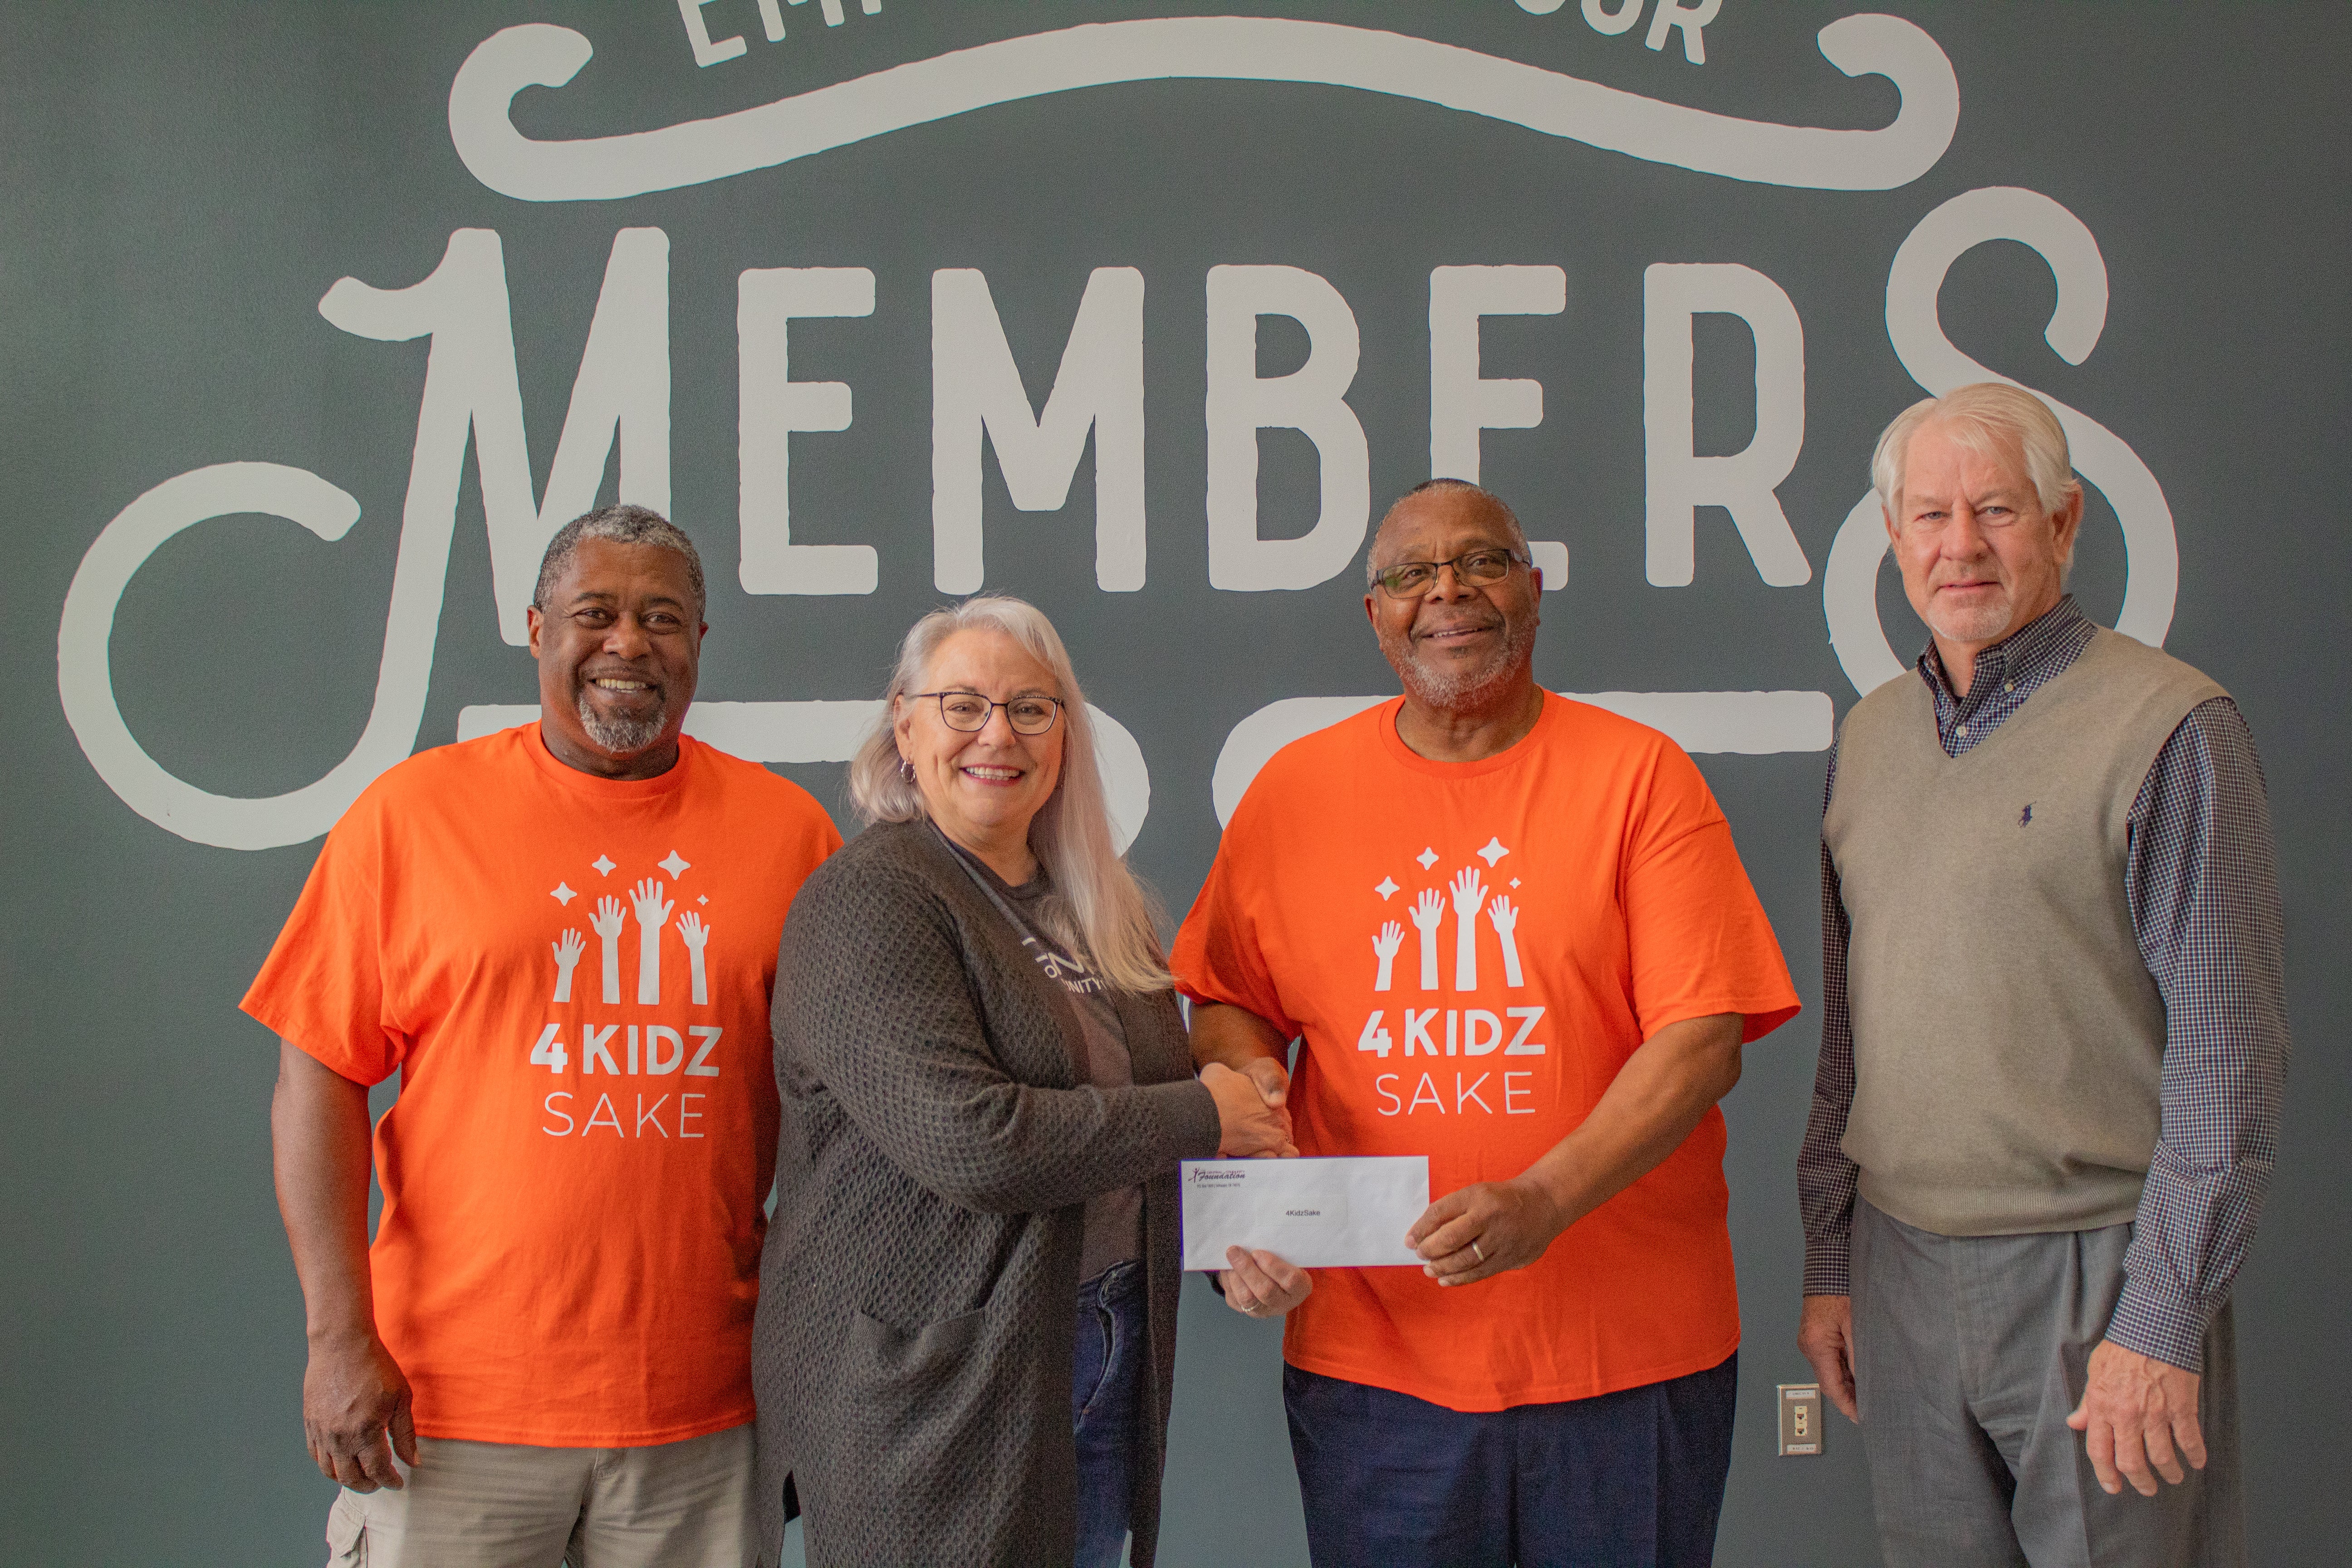 From left to right: 4KidzSake.org cofounder Leon Jones, Central Community Foundation board member Donna Dollins, 4KidzSake.org cofounder Terry Miller, and Central Rural Electric Cooperative Trustee Ken Starks. 